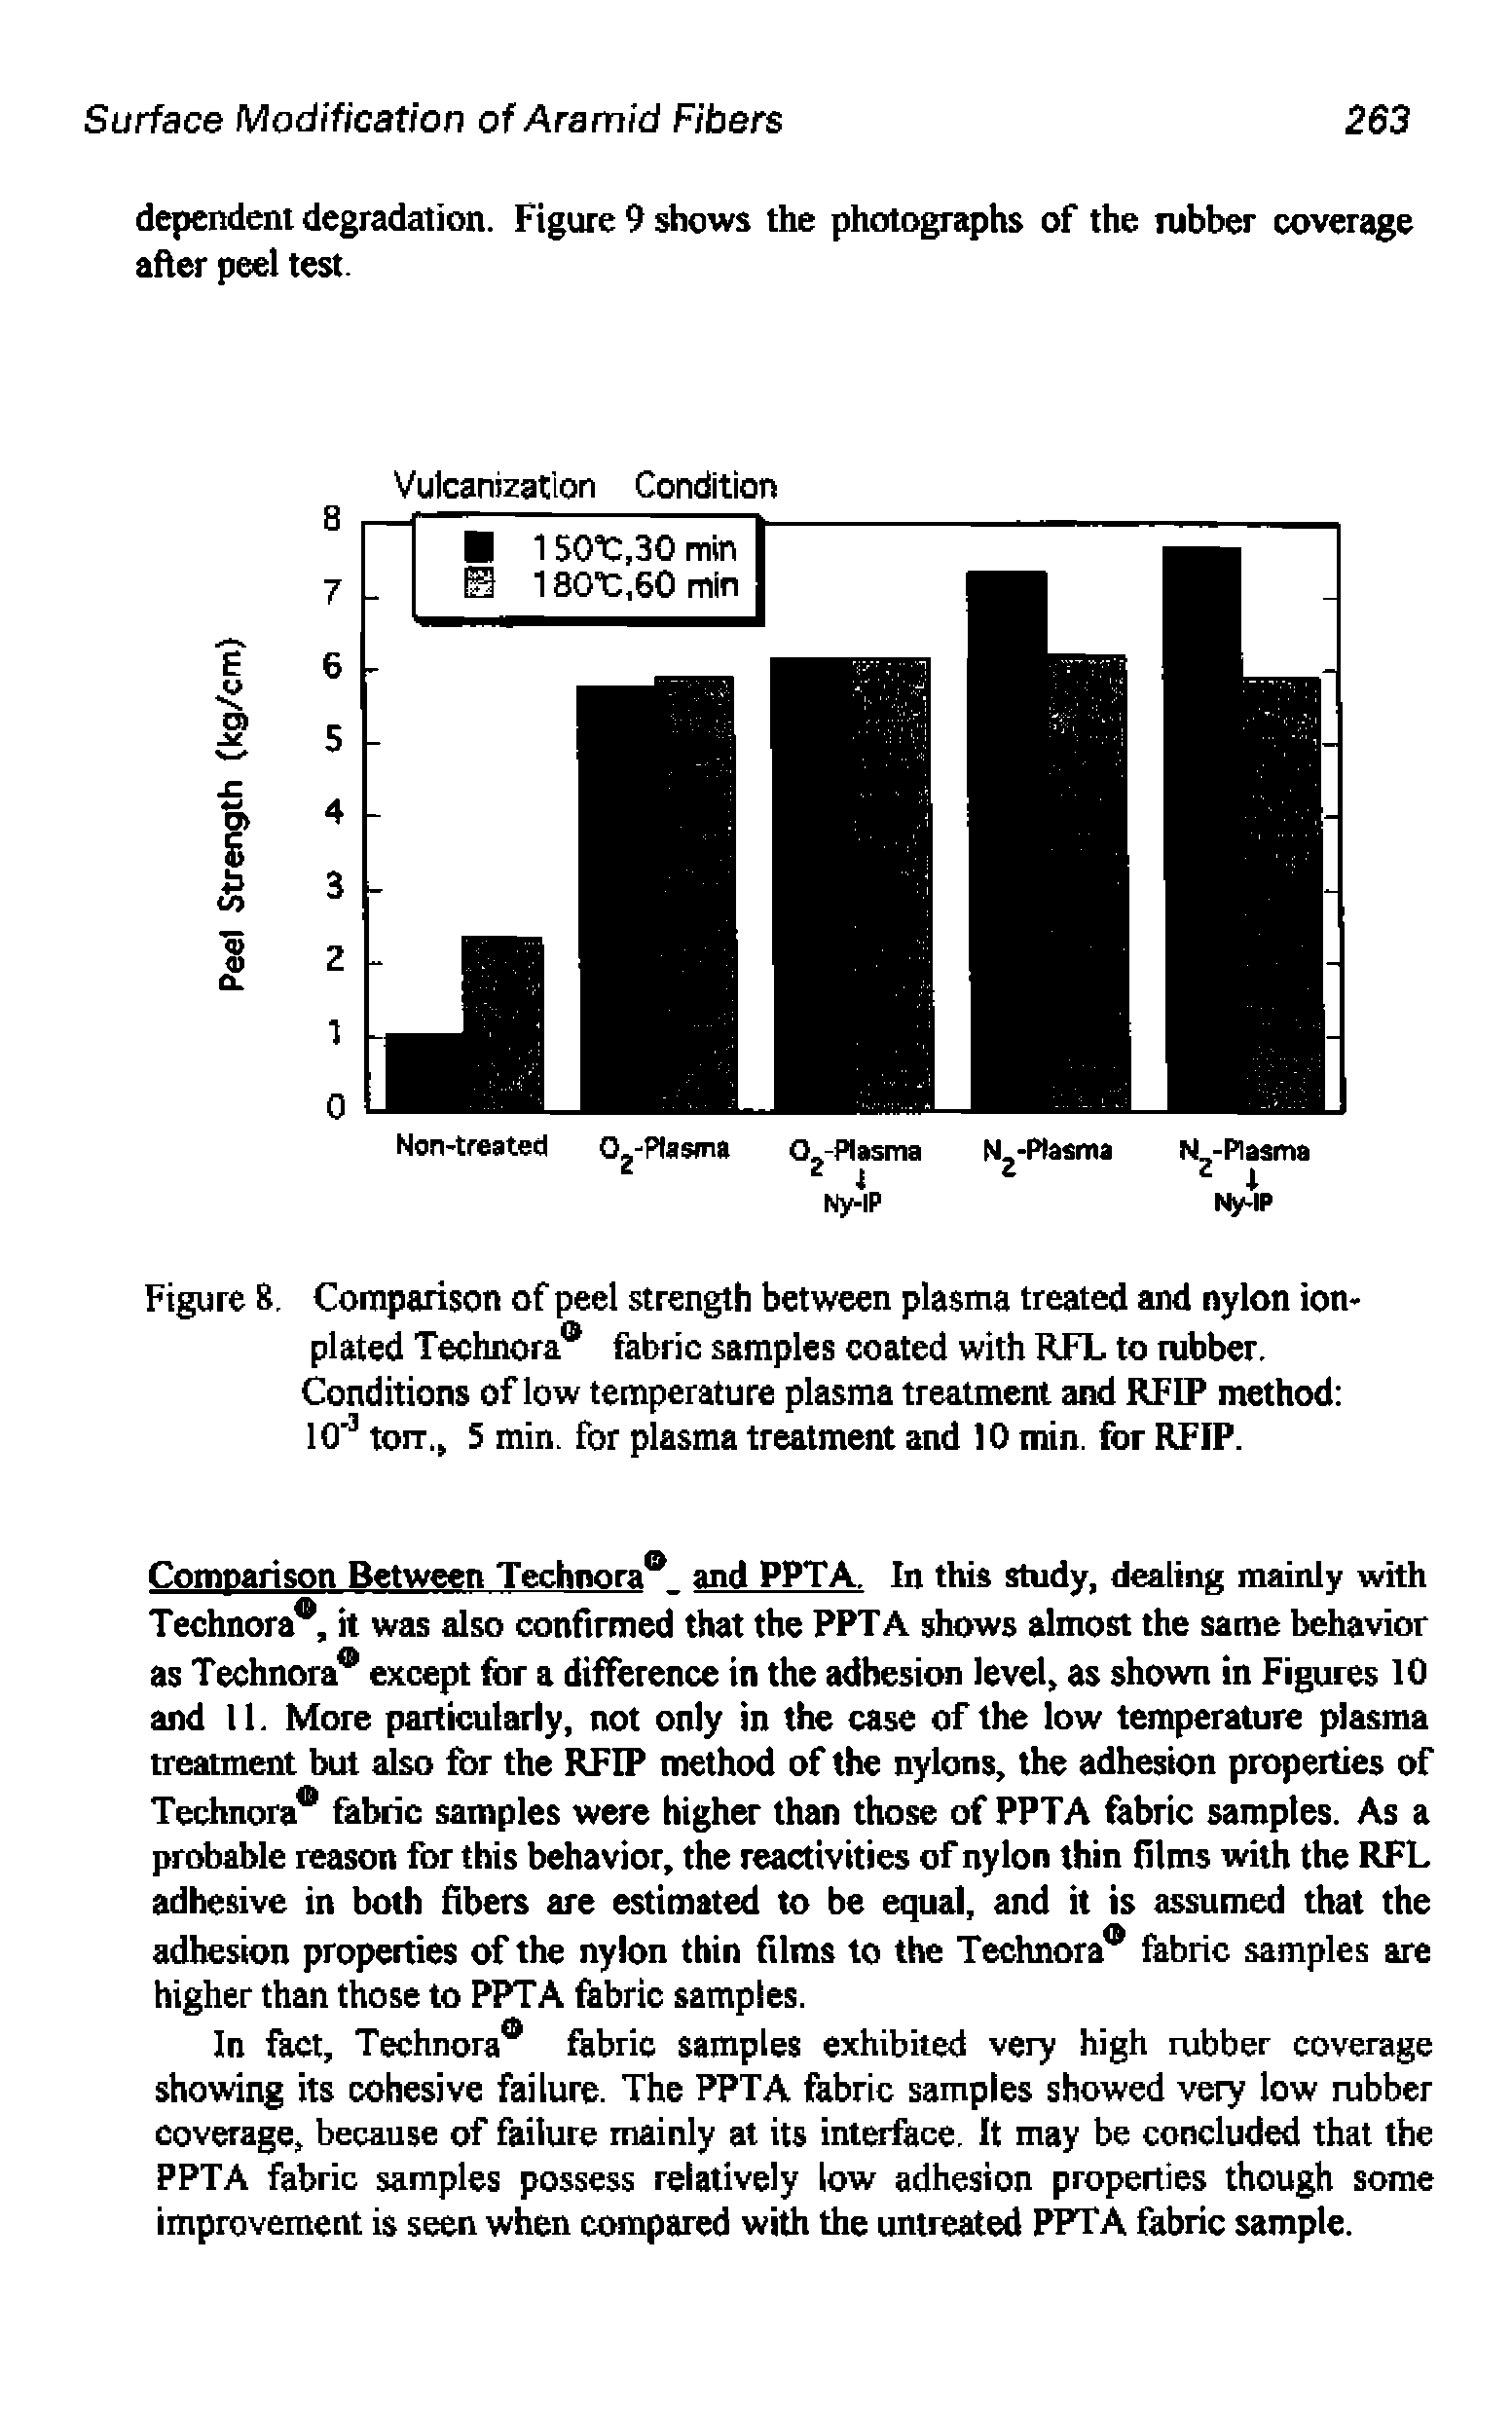 Figure 8, Comparison of peel strength between plasma treated and nylon ion-plated Technora fabric samples coated with RFL to rubber. Conditions of low temperature plasma treatment and RFIP method 10 torr., 5 min. for plasma treatment and 10 min. for RFIP.